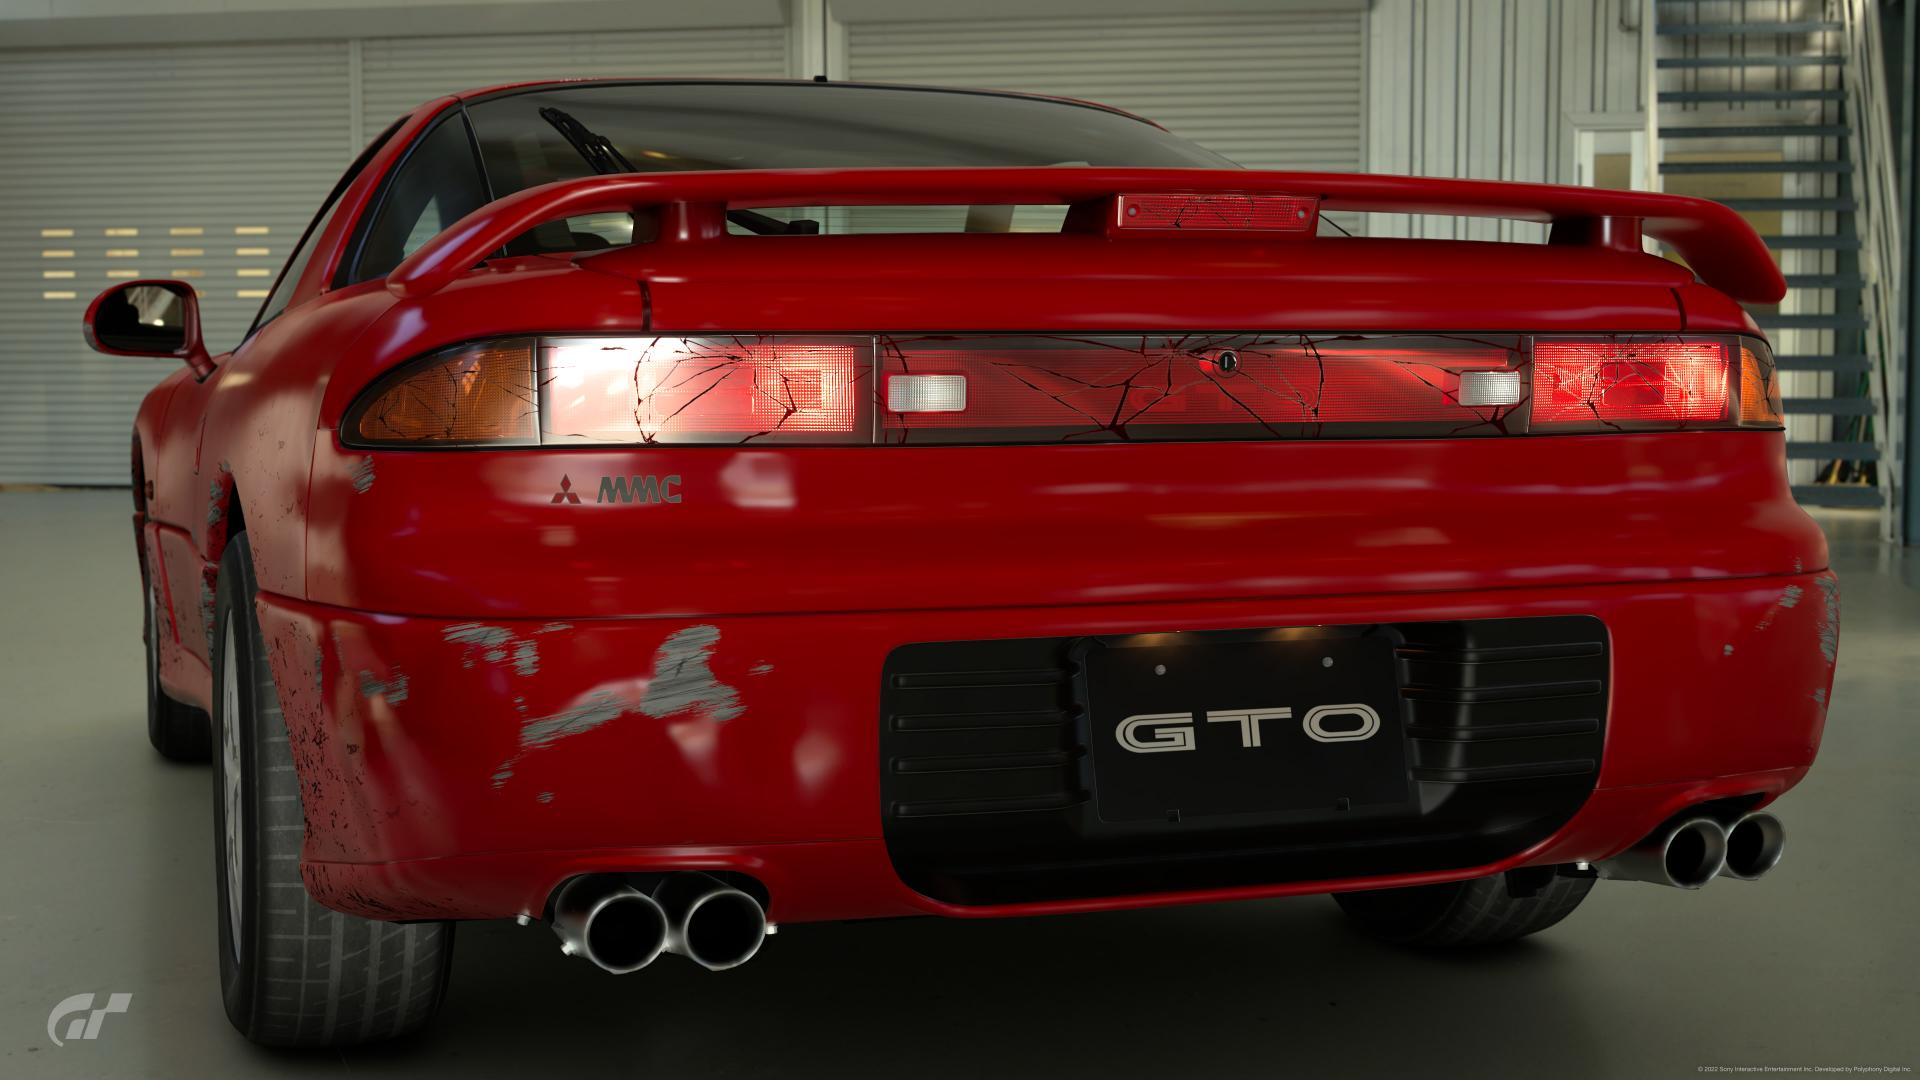 GT  SGP on X: Tuning is back! #GranTurismo #GT7 #PS5   / X